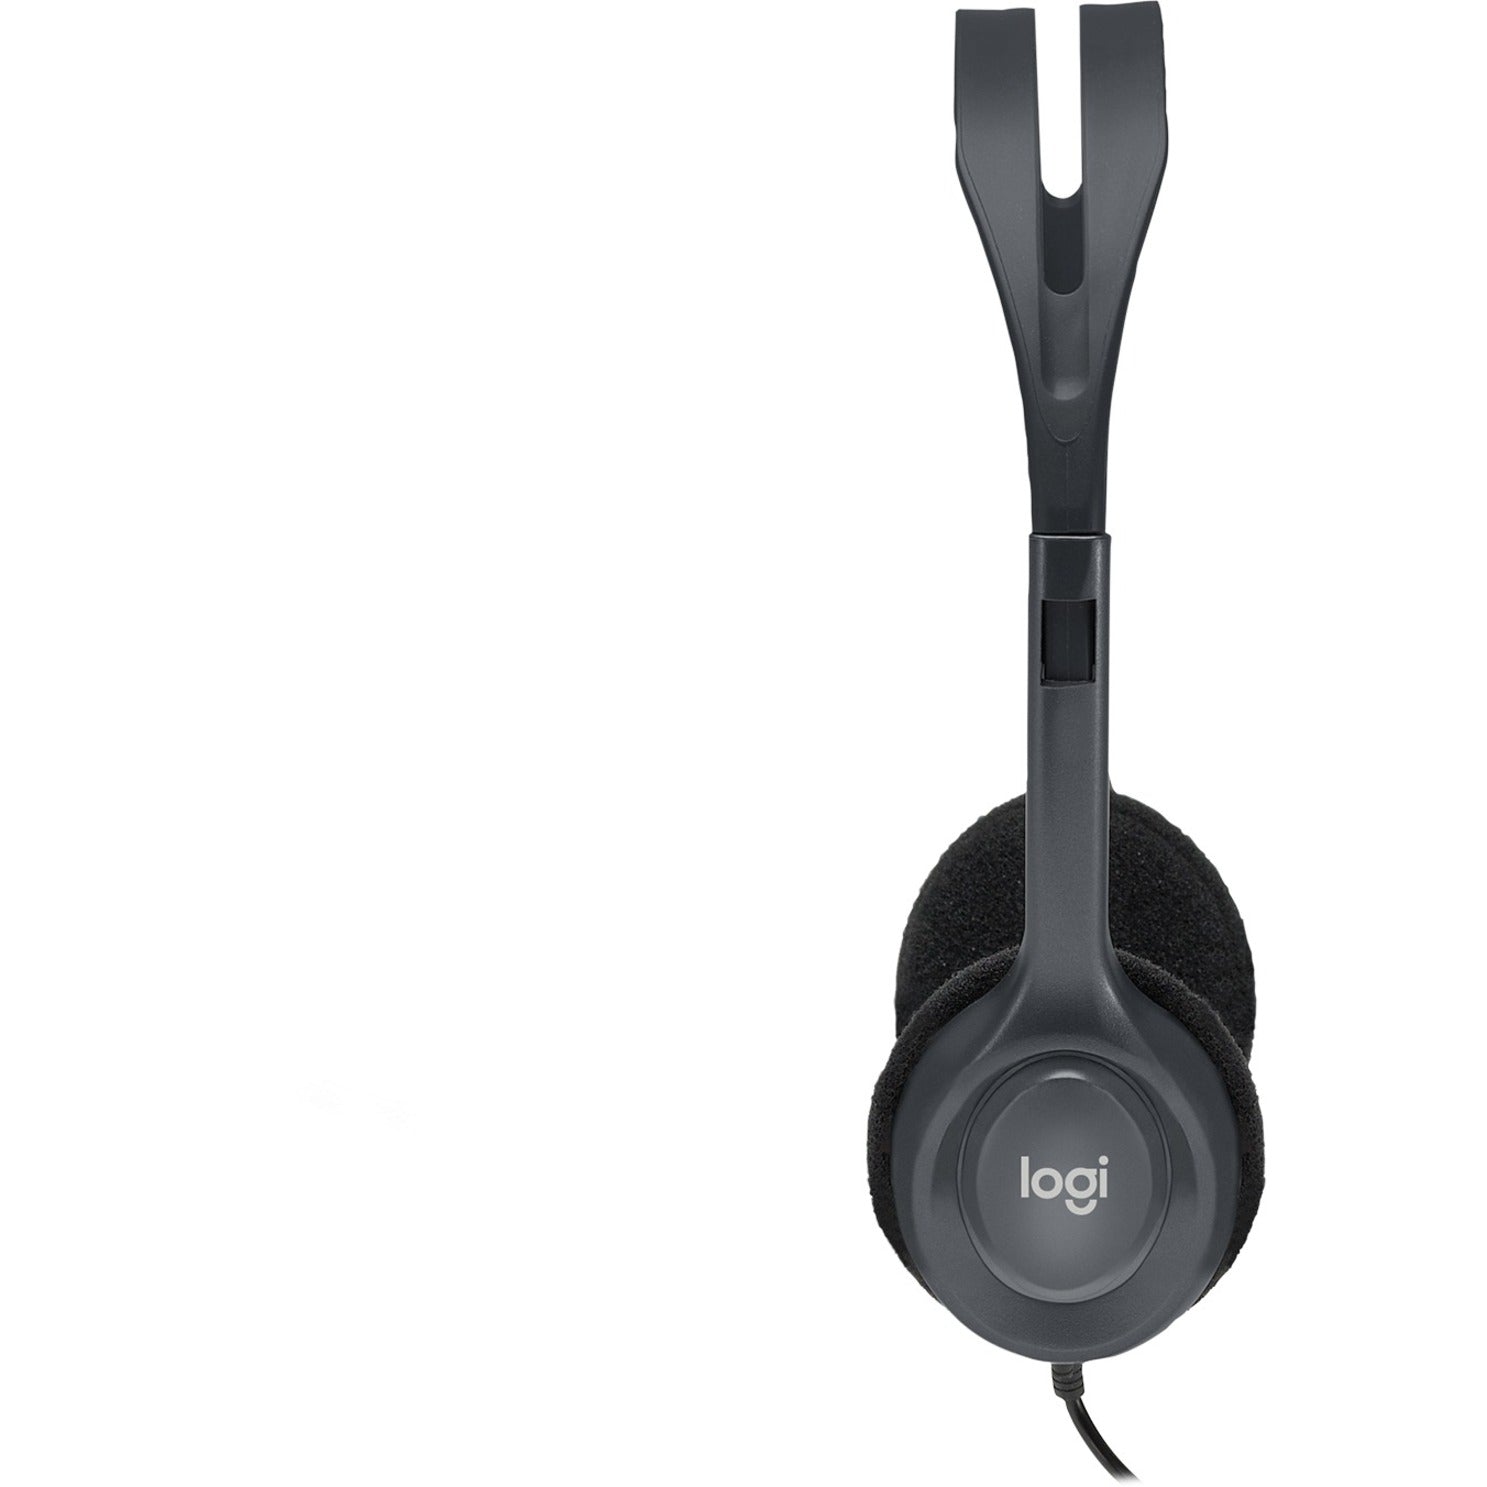 Logitech 981-000612 Stereo Headset H111, Flexible Boom Microphone, Comfortable and Reversible, Wired Over-the-head Headset